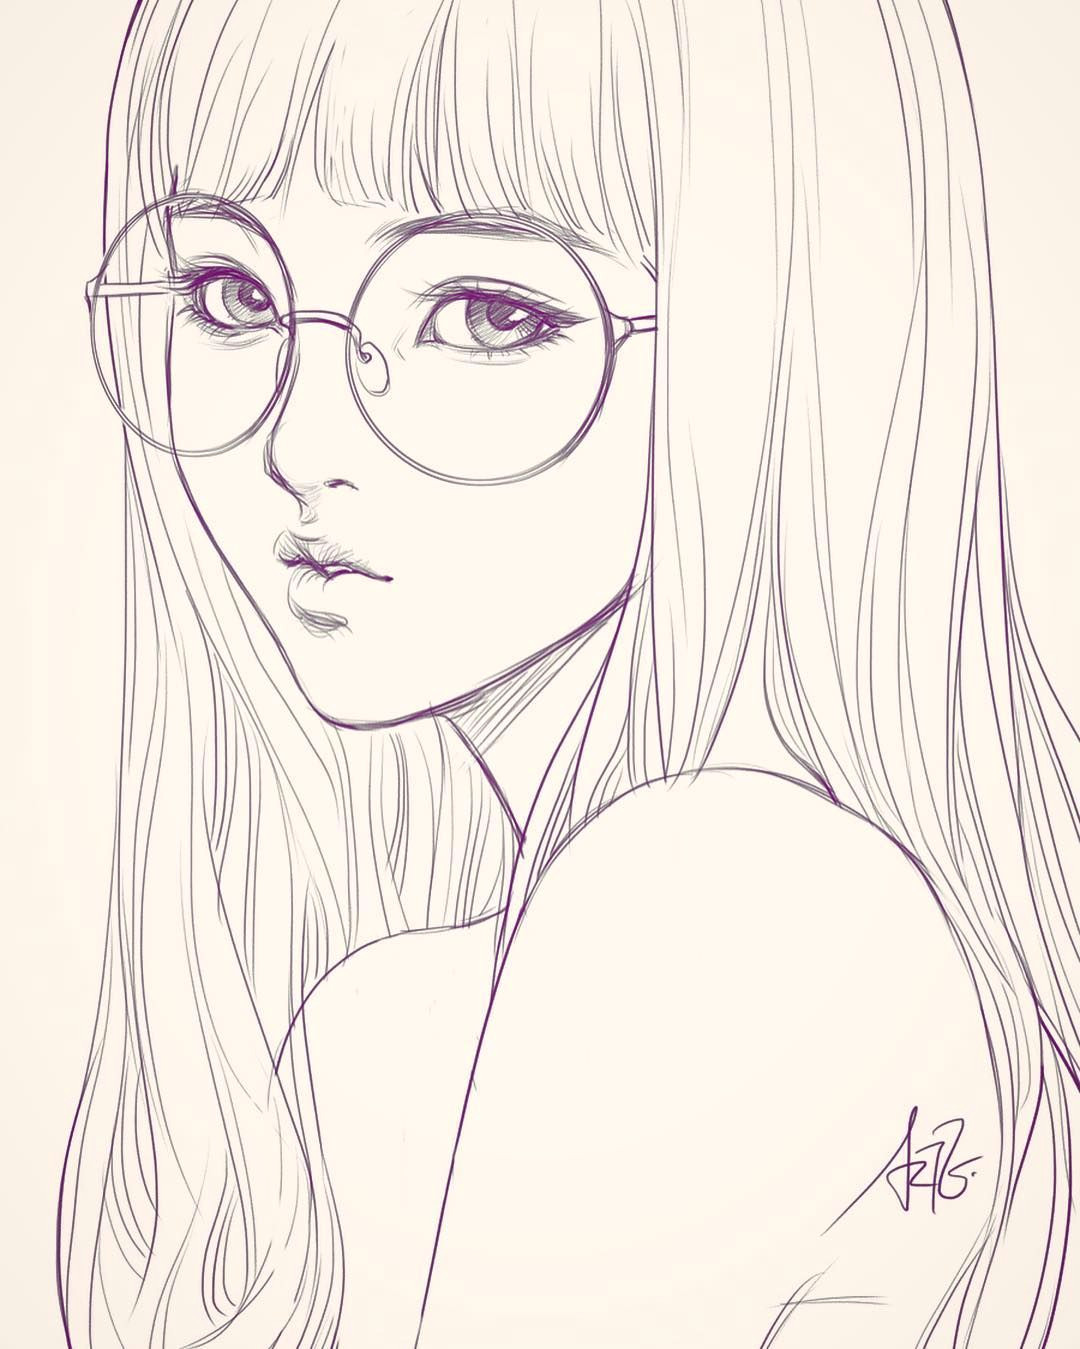 Drawing Ideas Glasses Last Sketch Of Girl with Glasses Having Bad Backache It Hurts